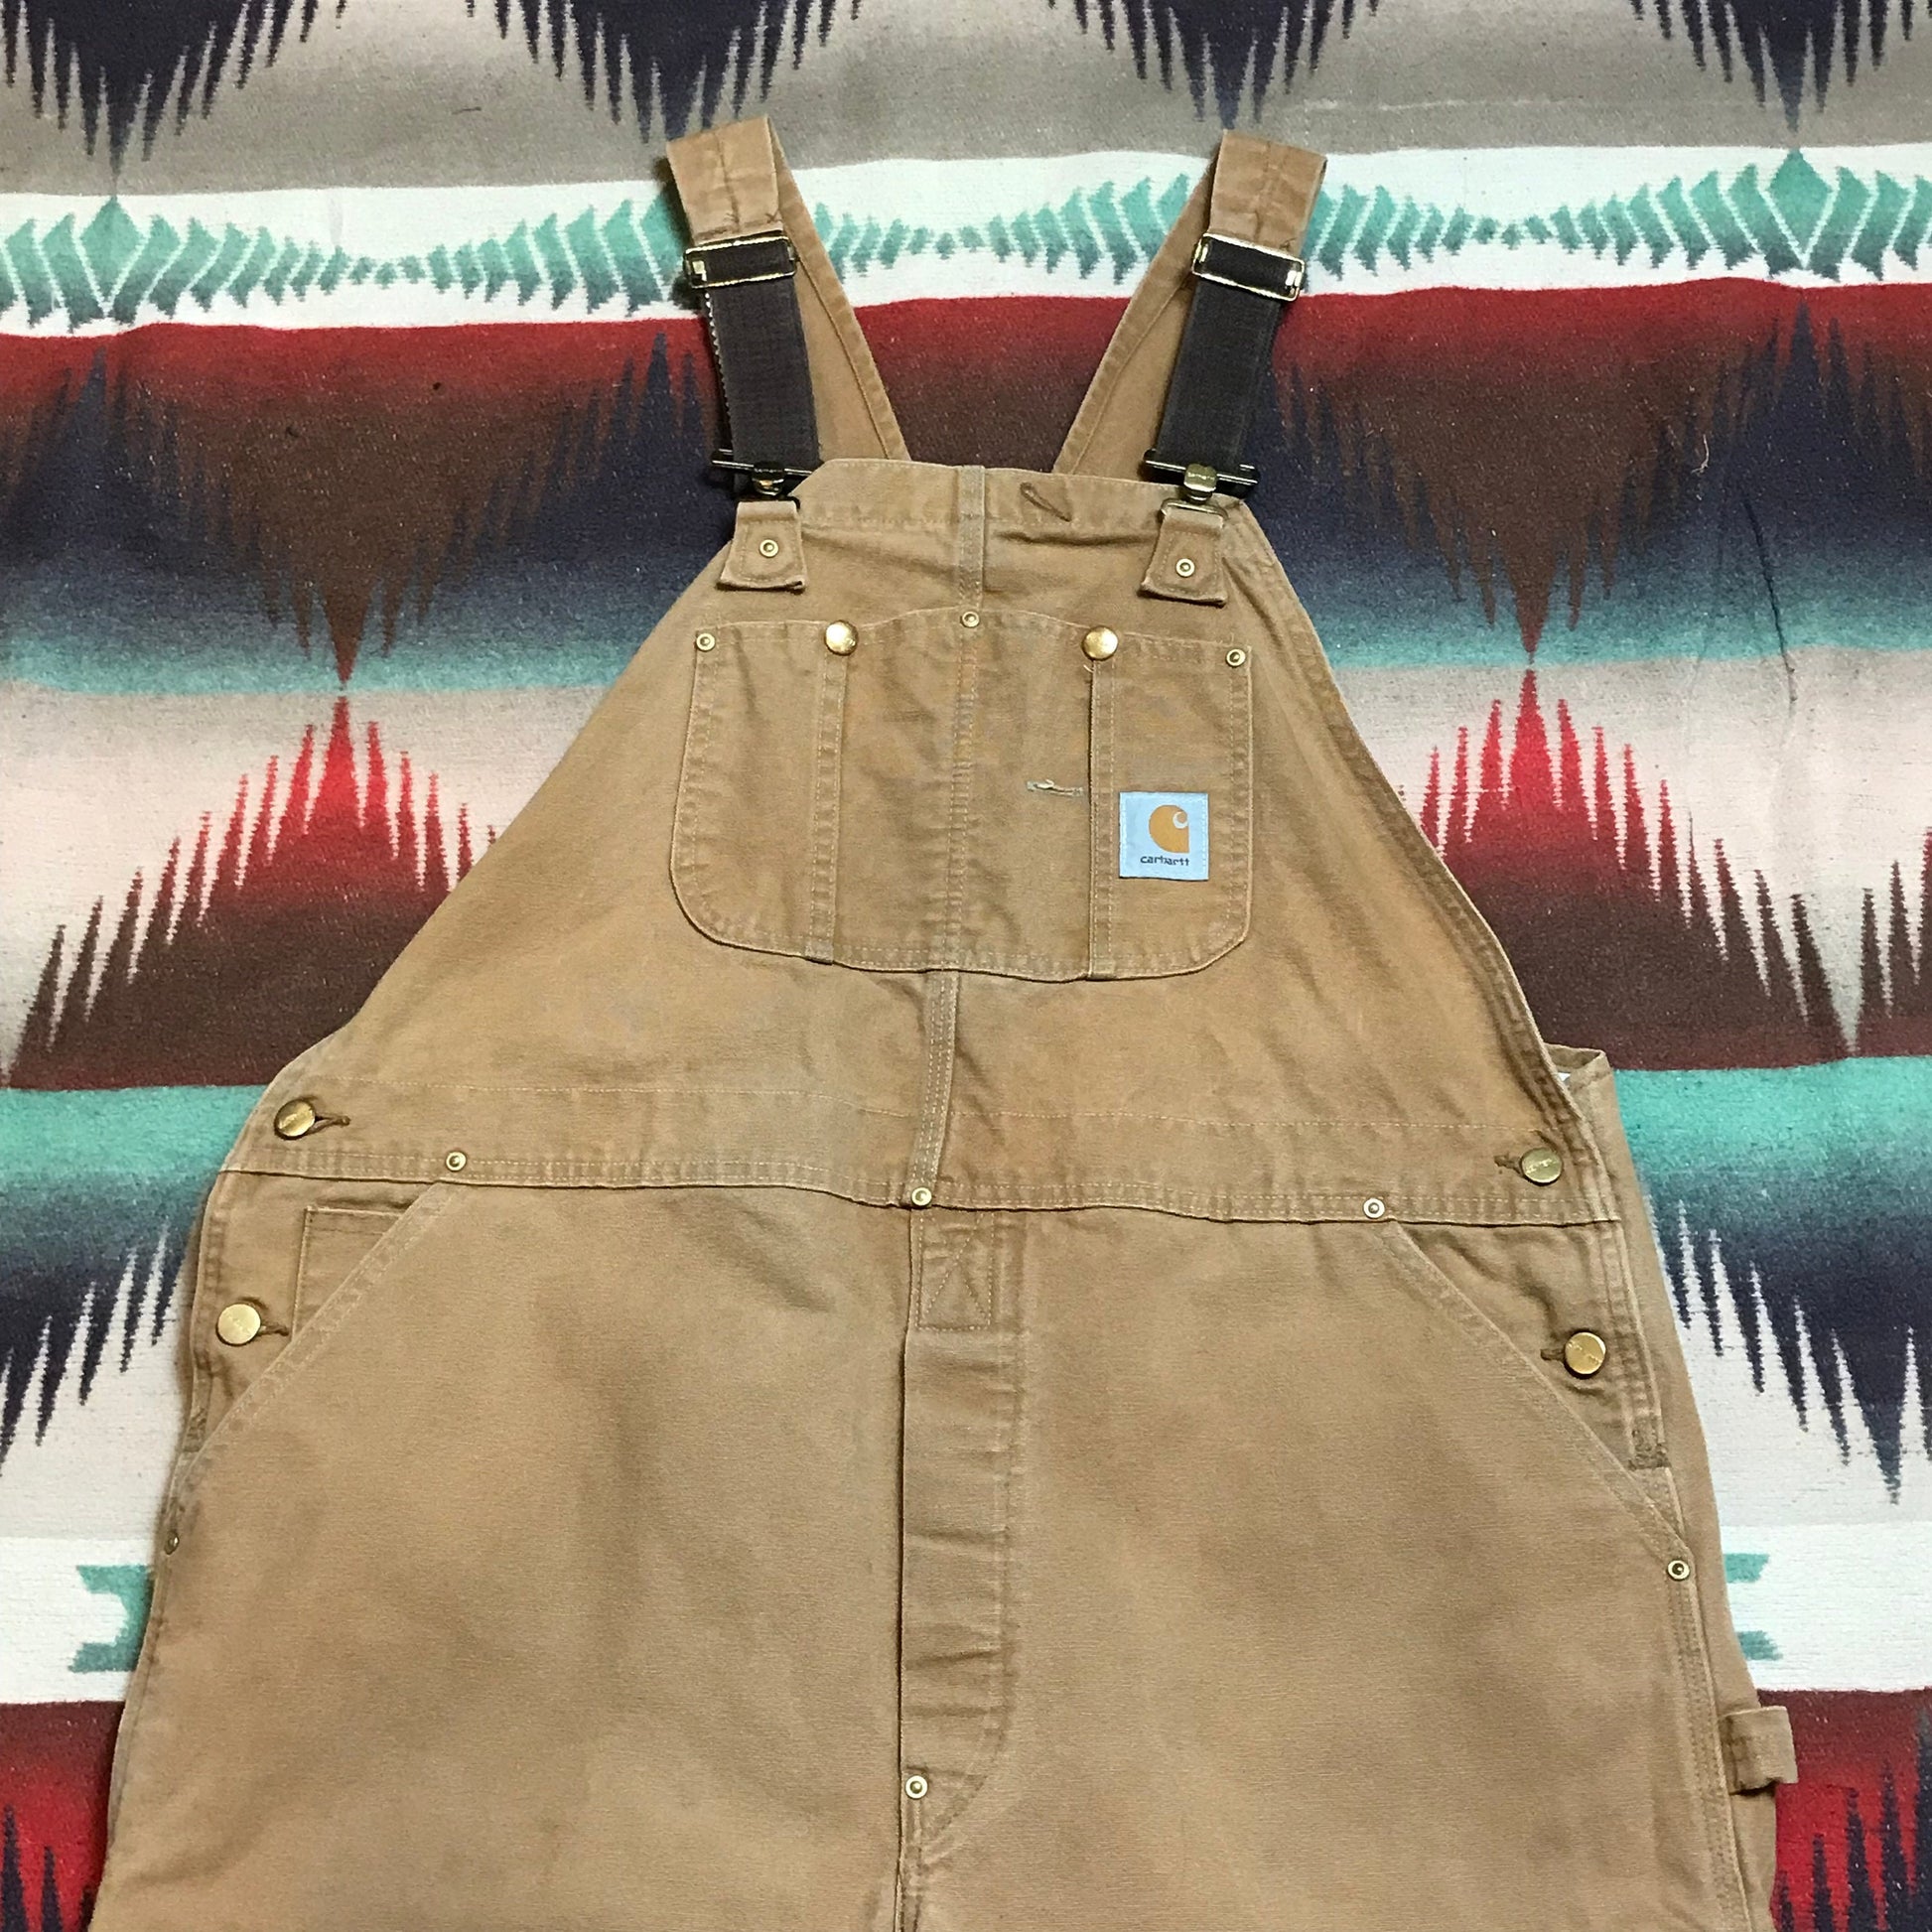 1990s Tan Carhartt Double Knee Overalls Made in USA Size 42x26.5